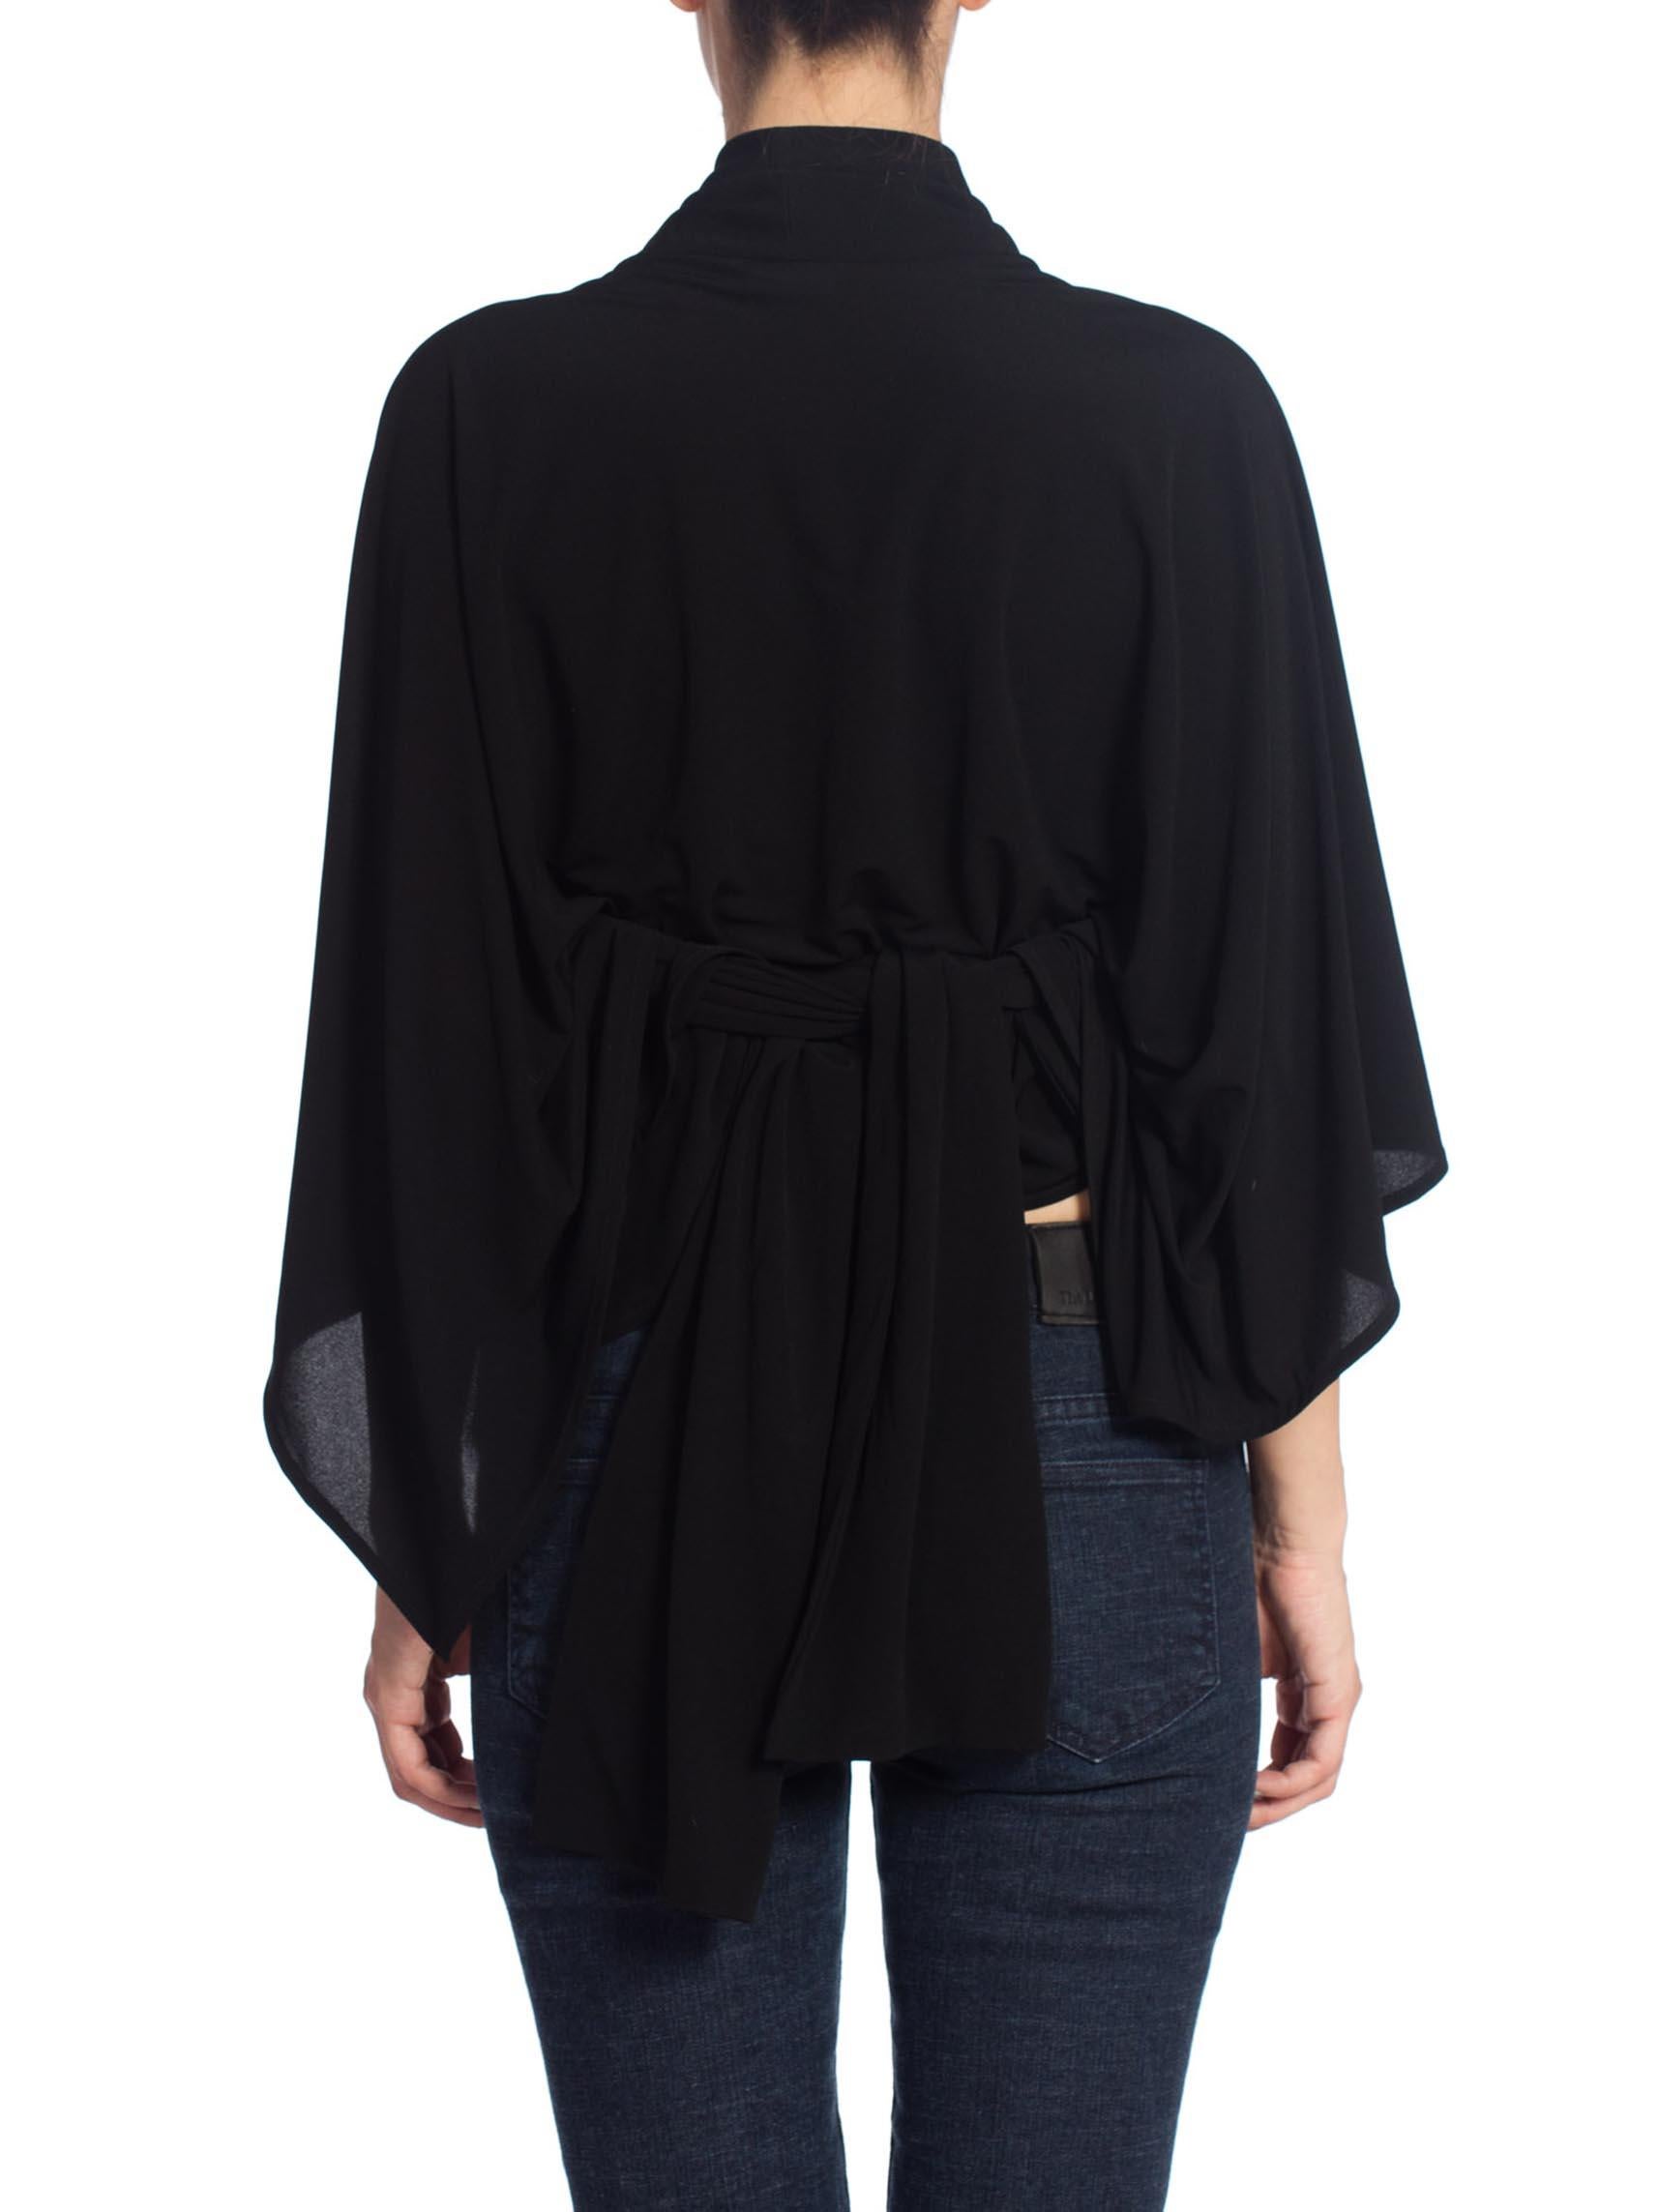 1980S NORMA KAMALI Style Black Jersey Draped Oversize Top For Sale 2